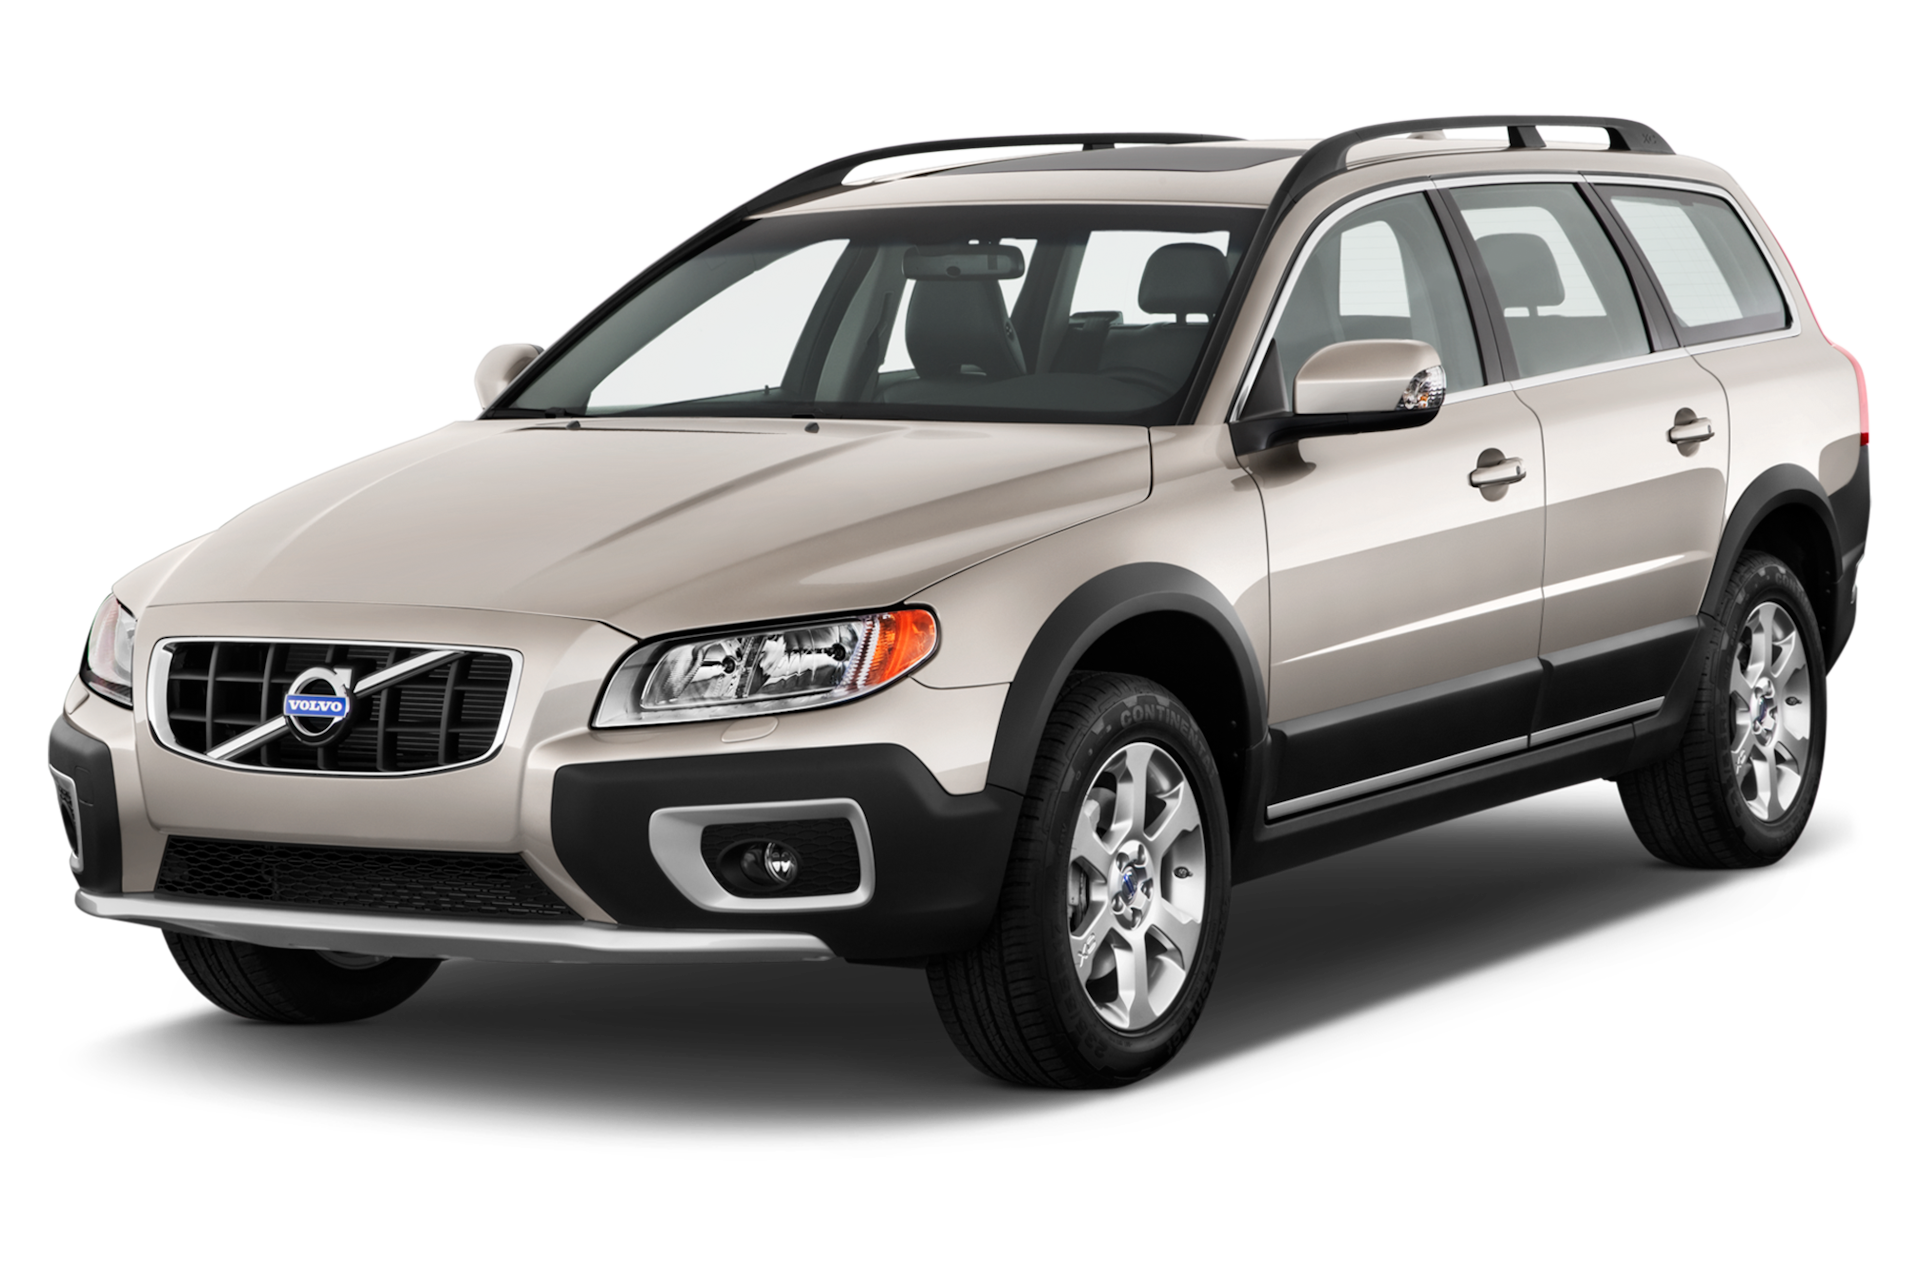 2012 Volvo XC70 Prices, Reviews, and Photos - MotorTrend